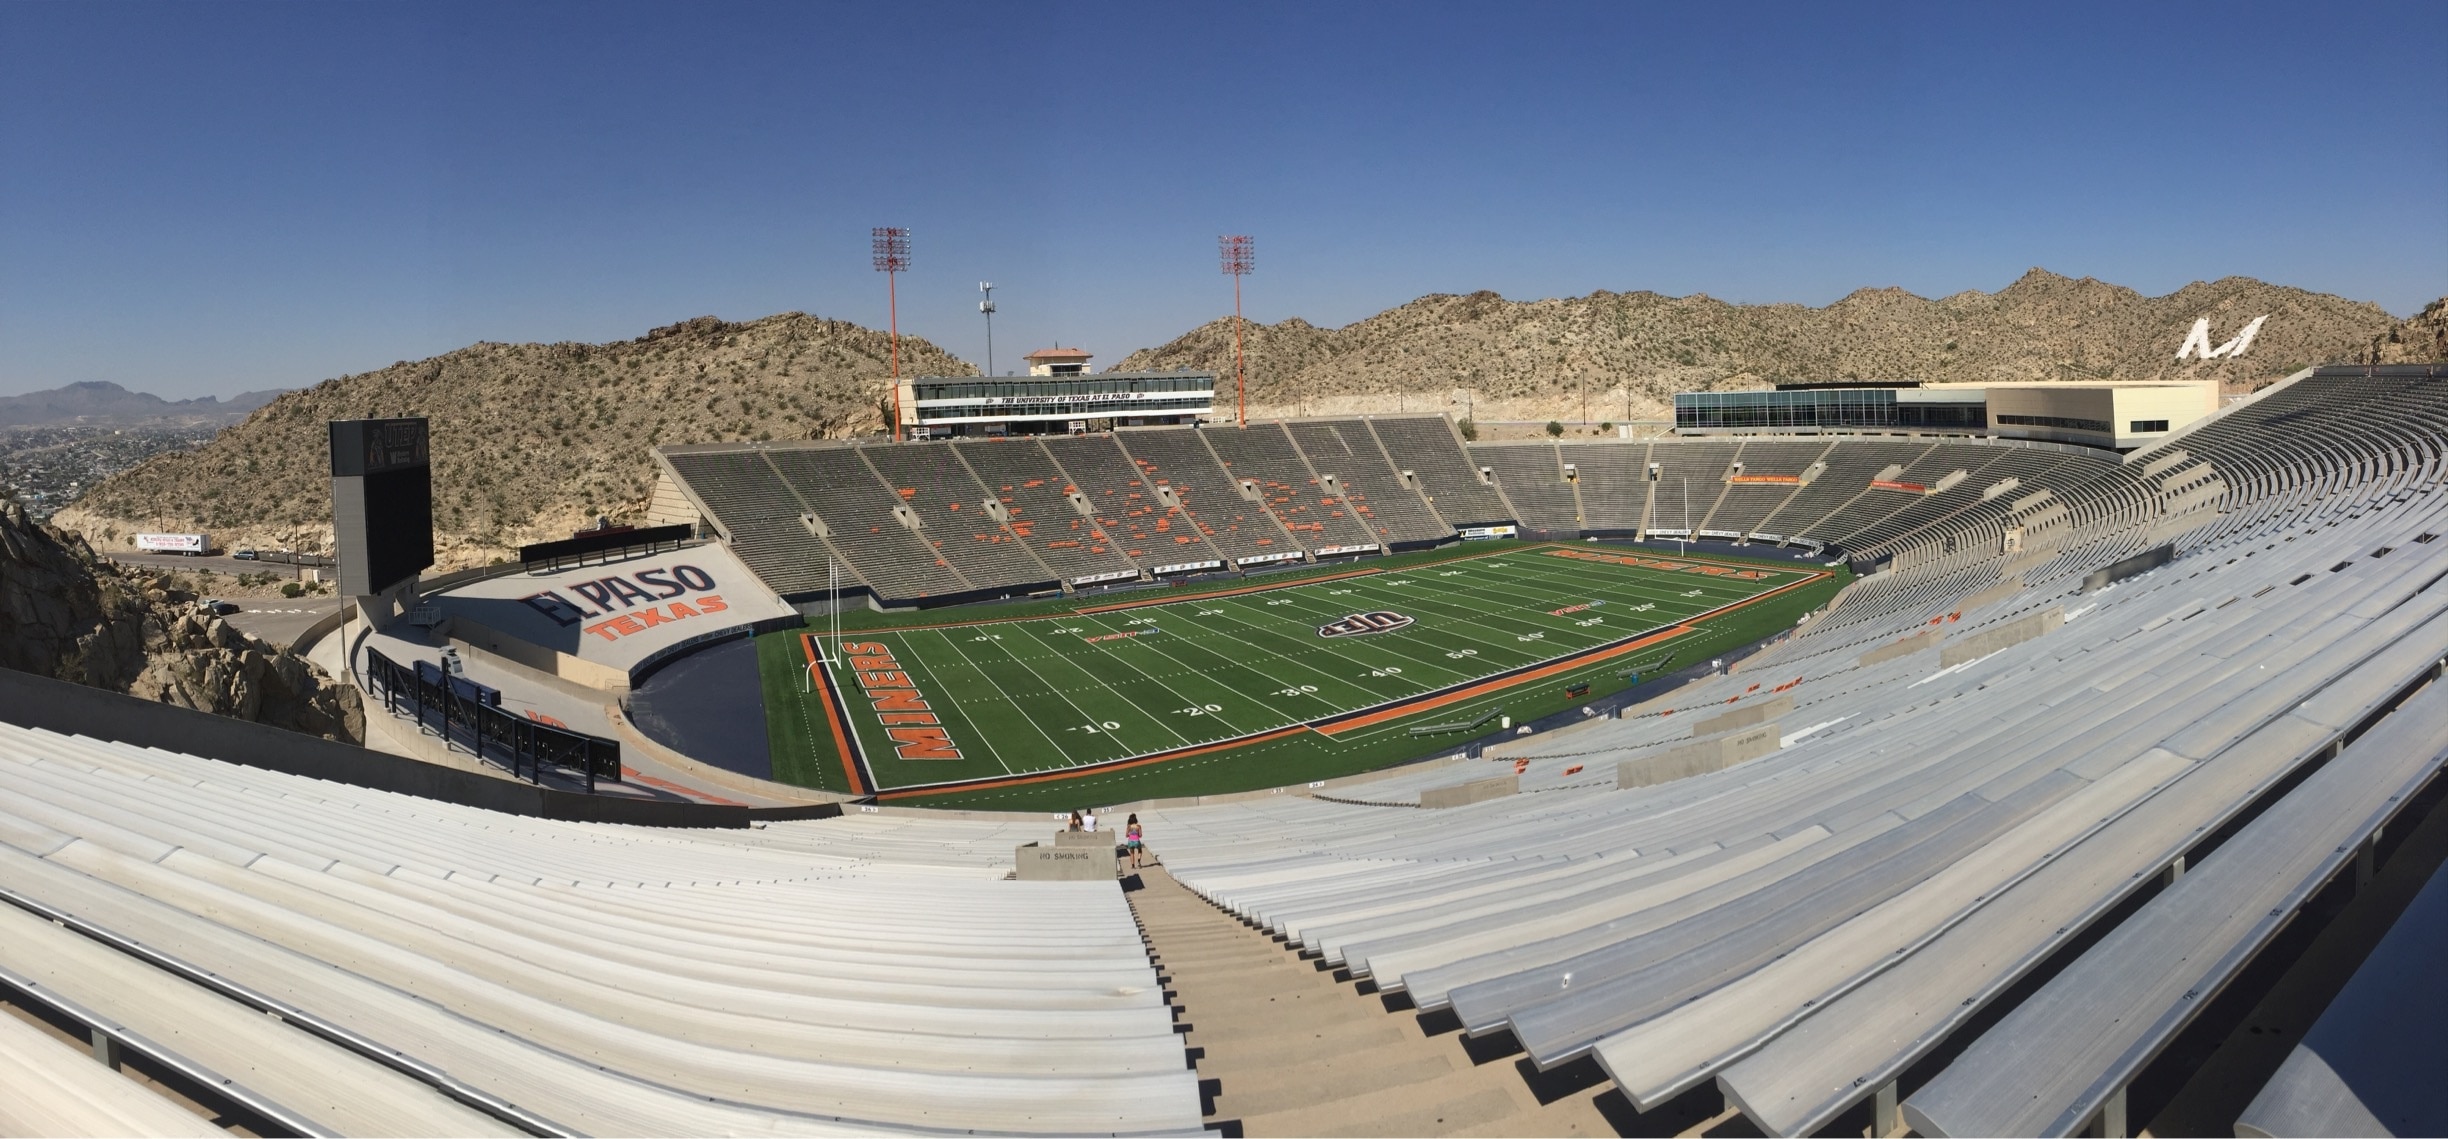 The Best Hotels Closest to Sun Bowl Stadium in El Paso for 2021 FREE